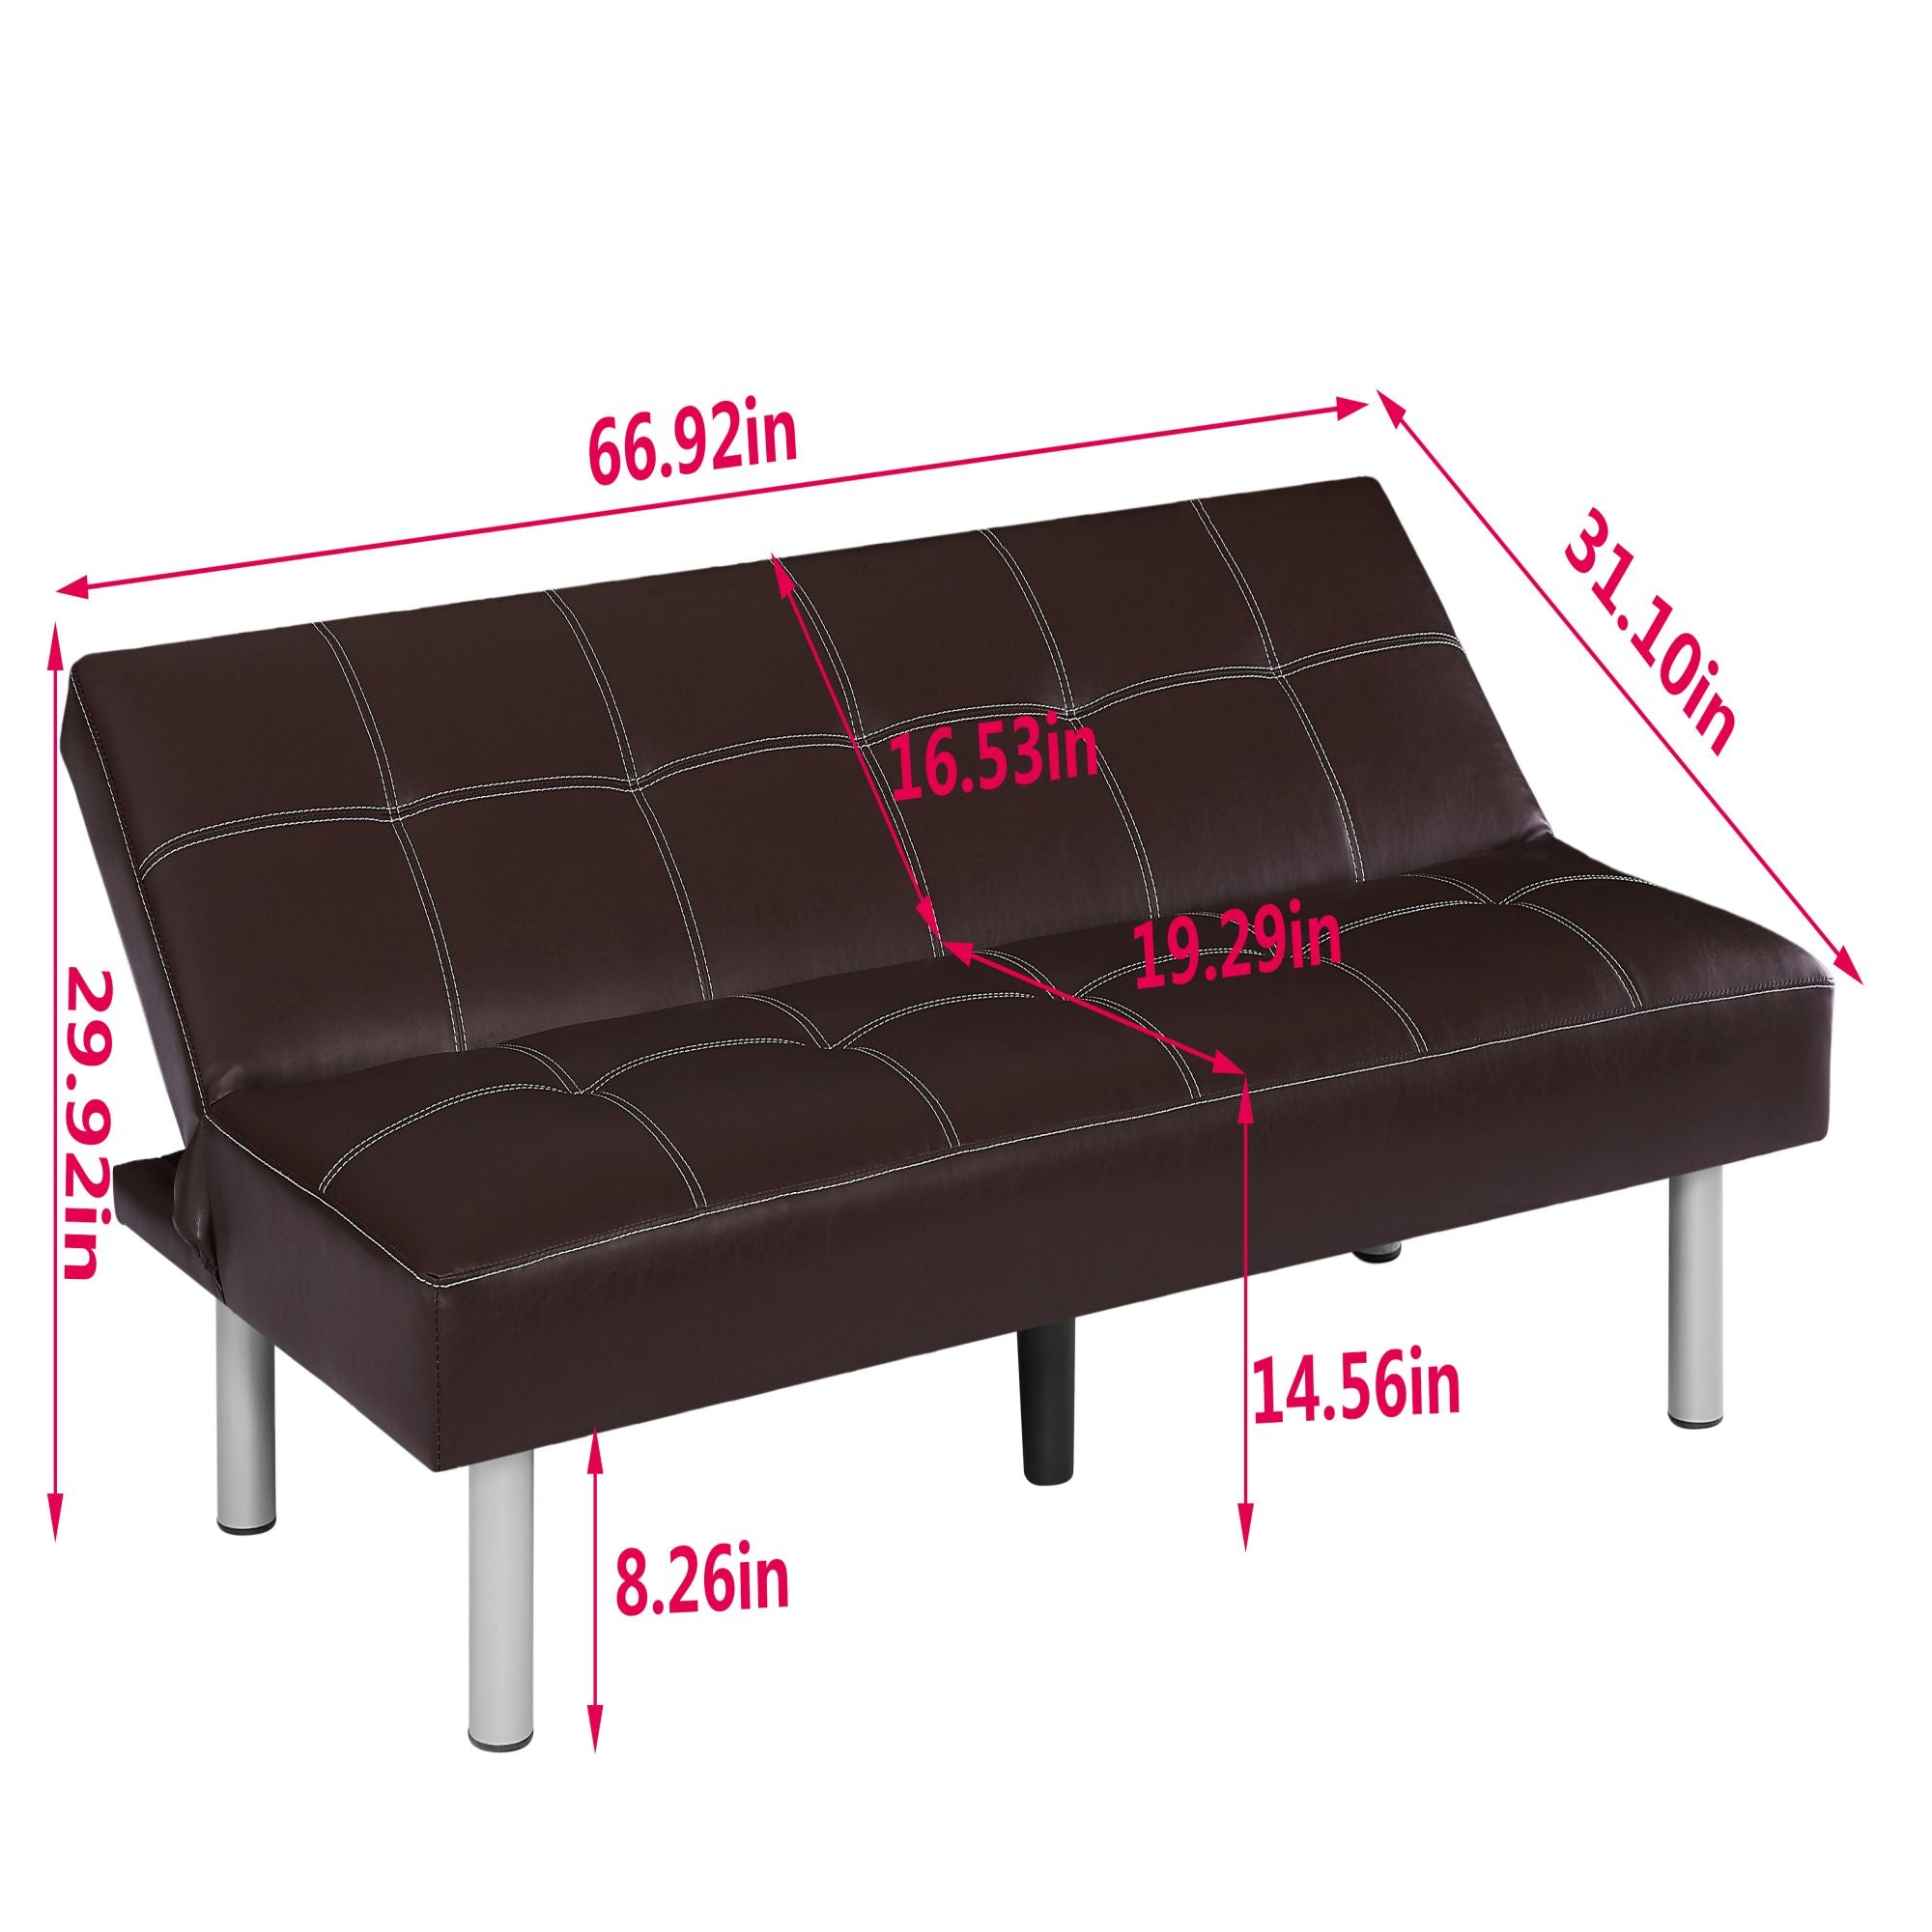 ZNTS Three-person foldable sofa bed, PU leather, solid wood frame and metal foot support,Can be laid flat 35368561